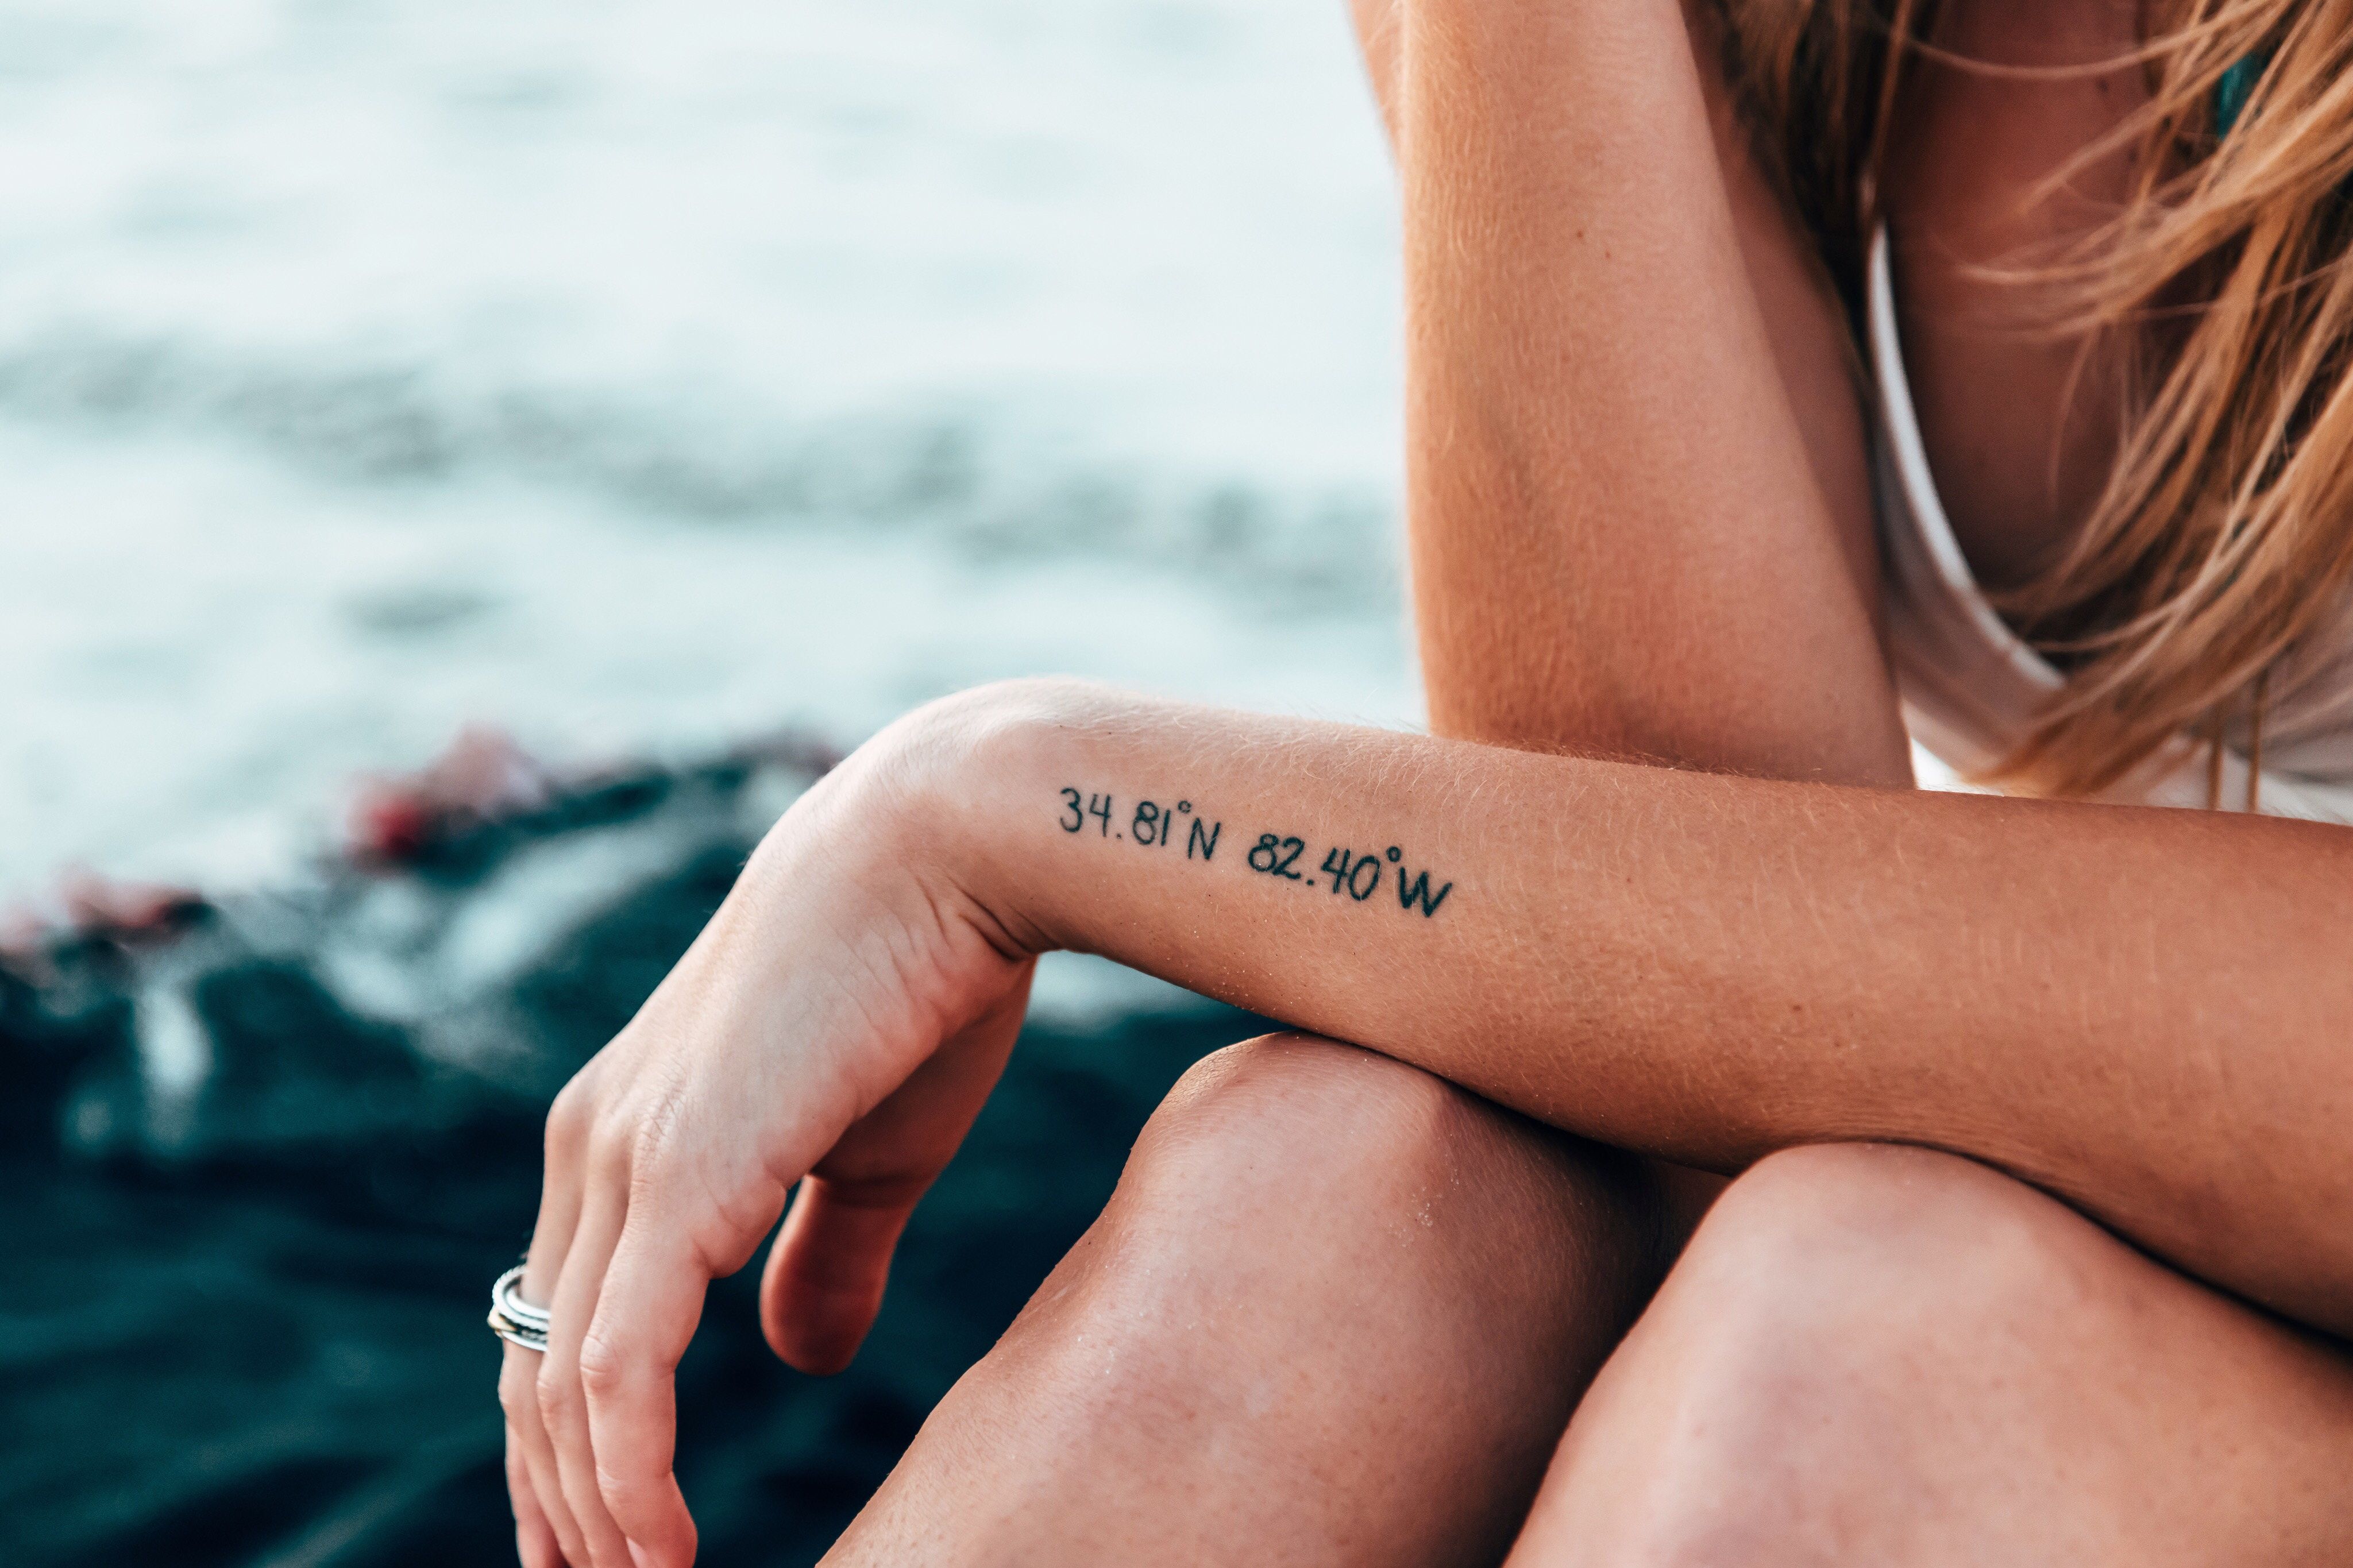 Introverts Rejoice 15 Tattoo Ideas to embrace the Introversion in you  httpswwwalienstattoocompostintrovertsrejoice15tattooideas toembracetheintroversioninyou